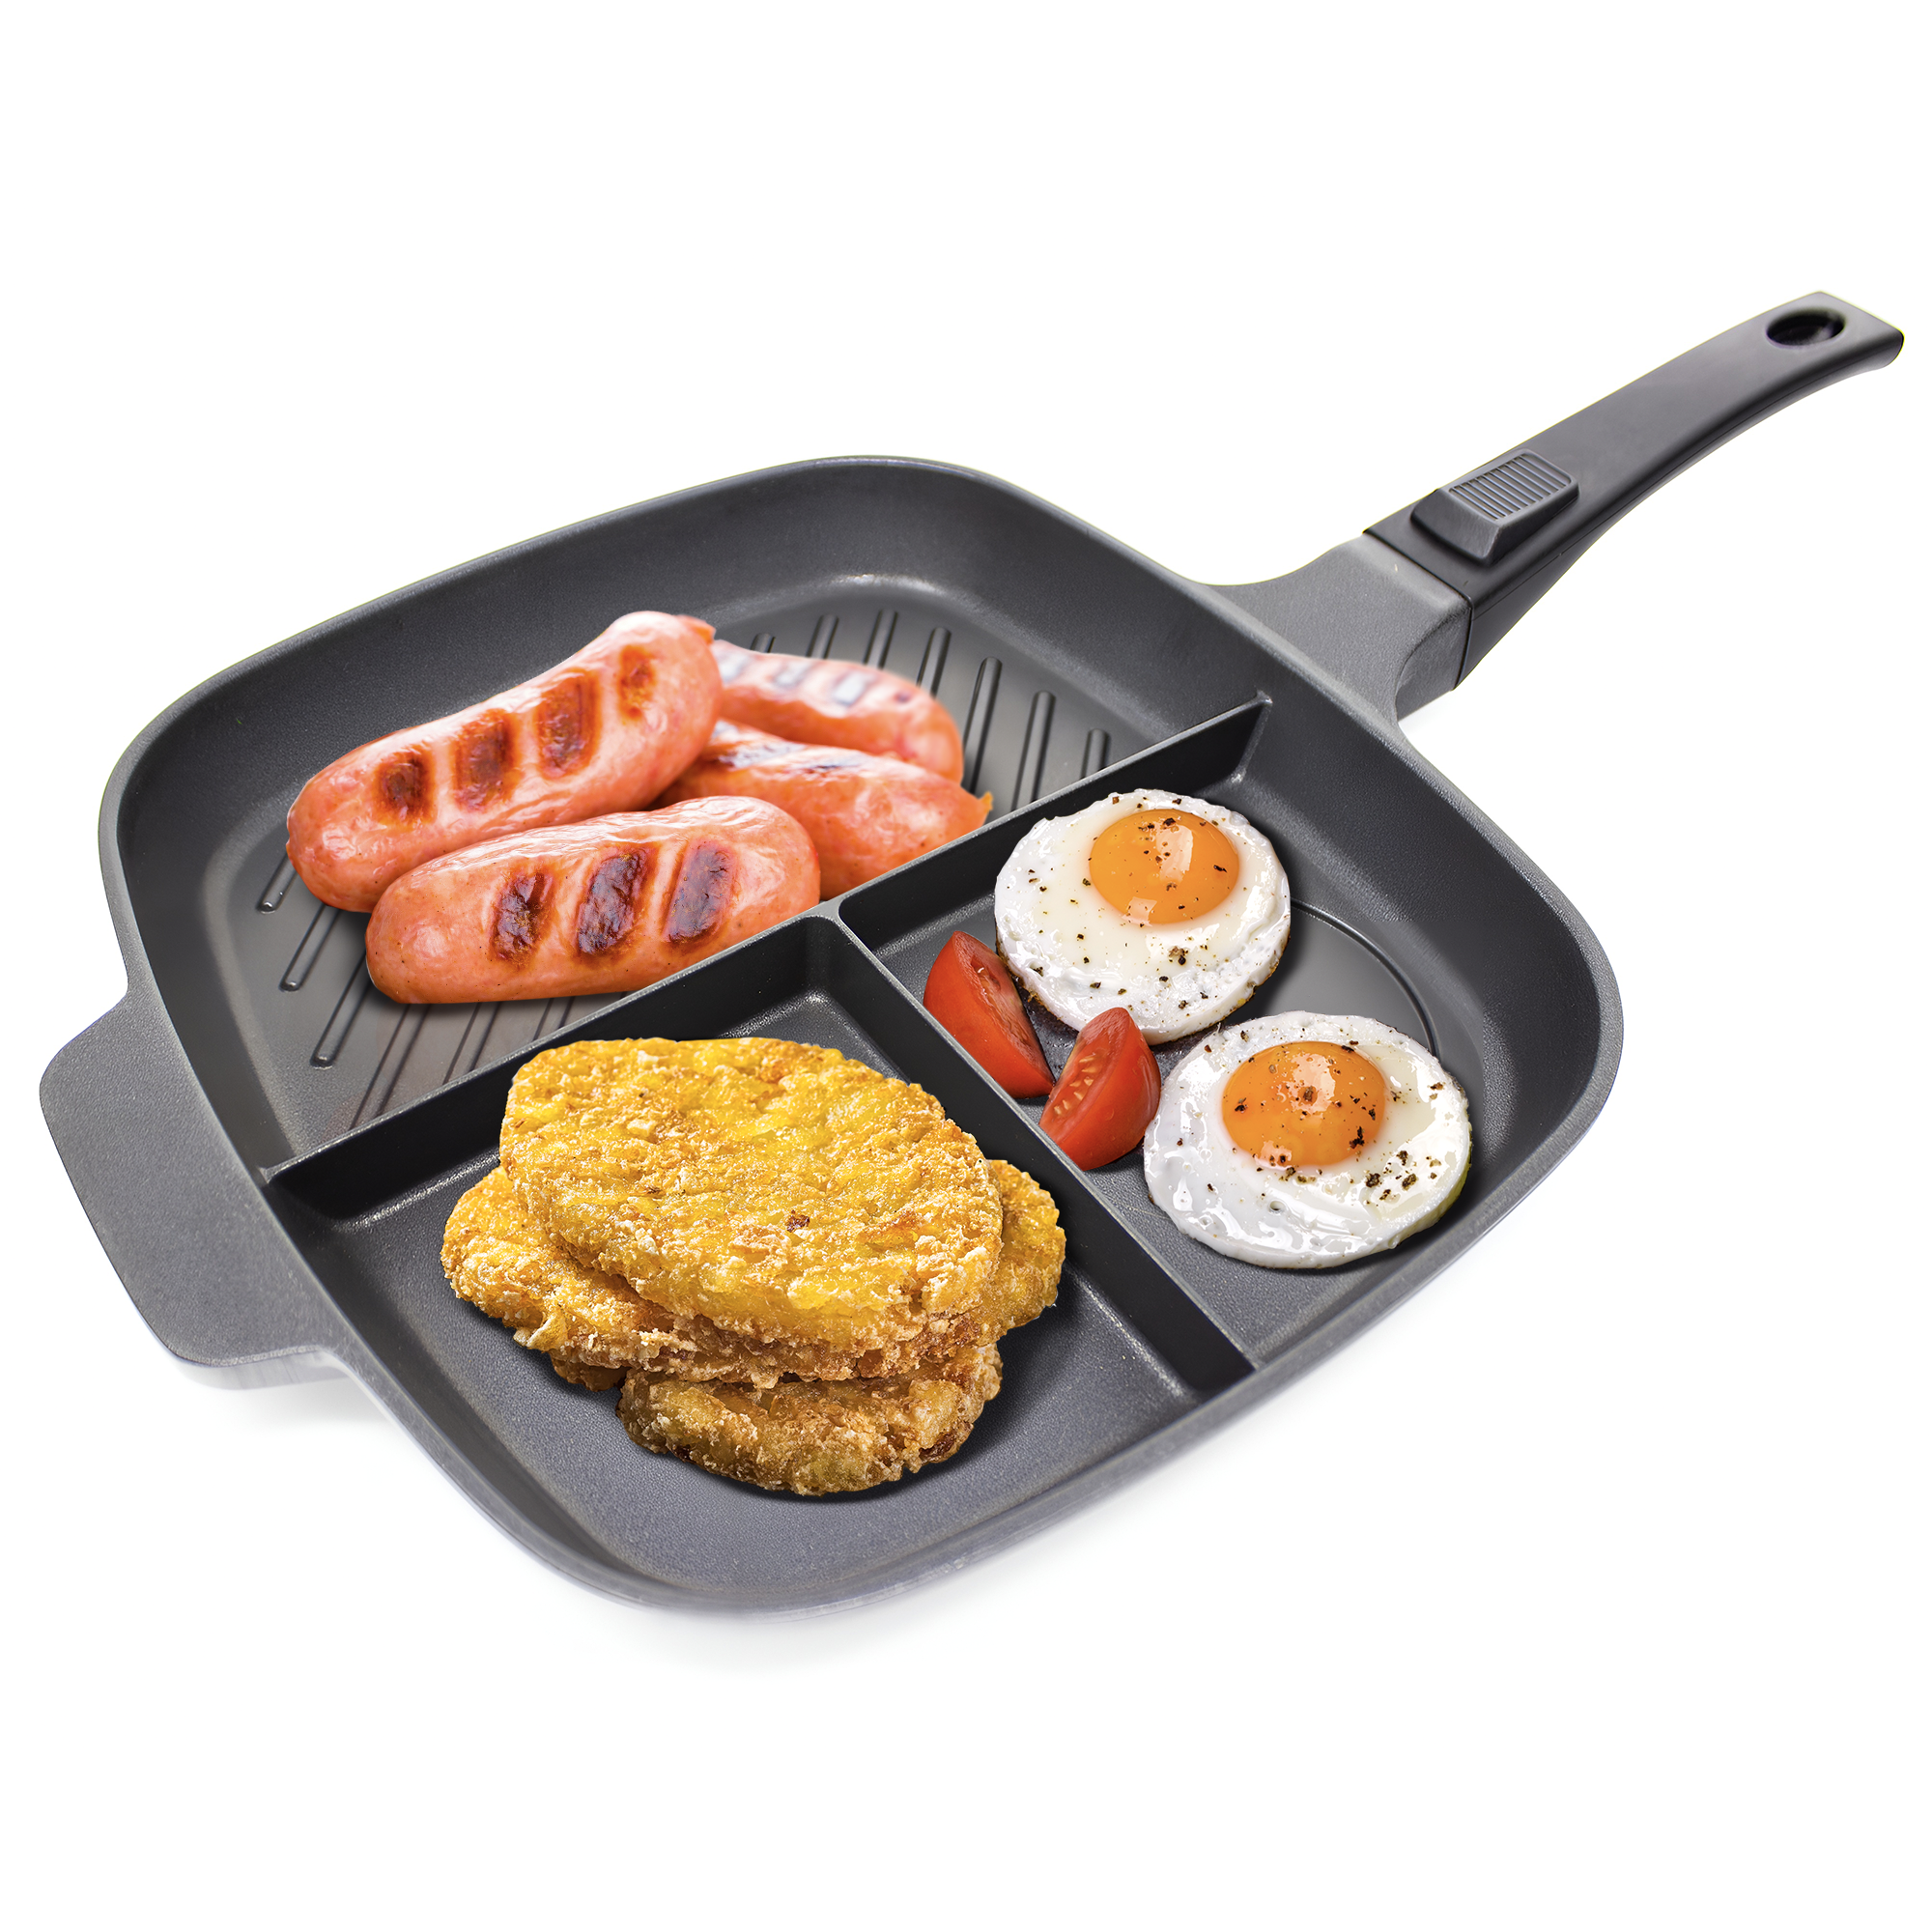 Induction Non Stick Multi Section 5 in 1 Frying Pan Grill Oven BBQ